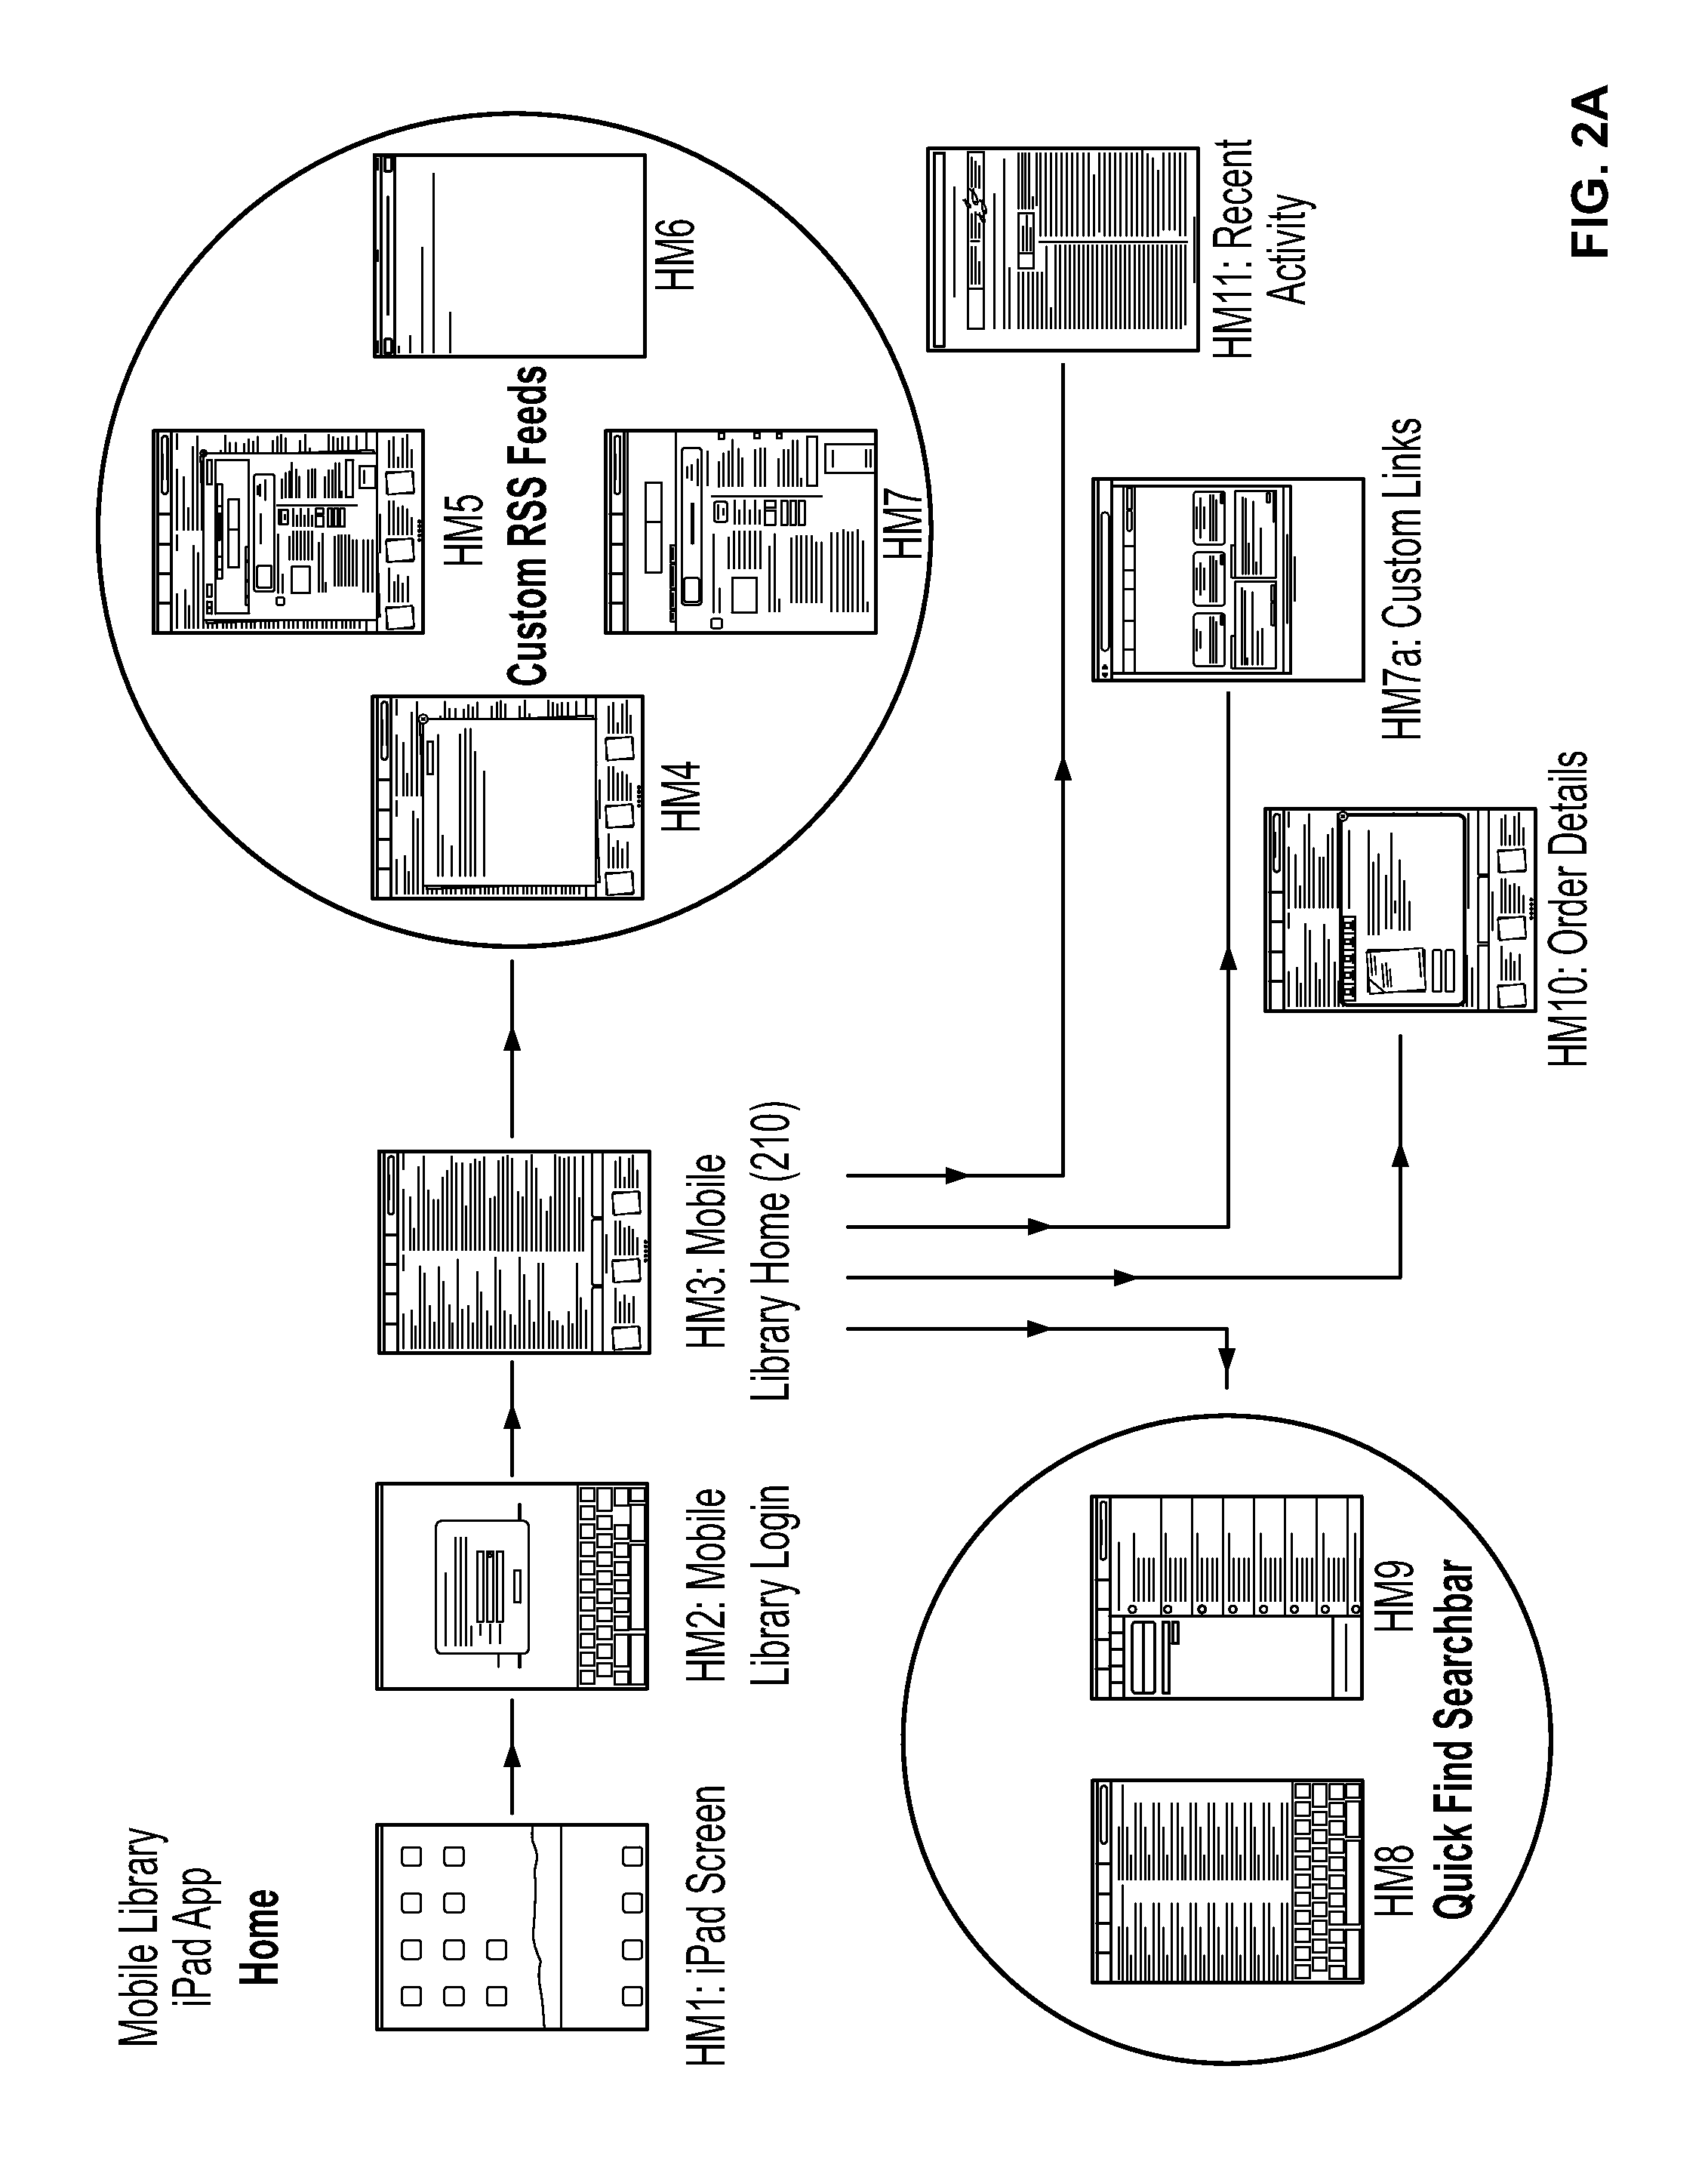 System and method for the centralized management of a document ordering and delivery program